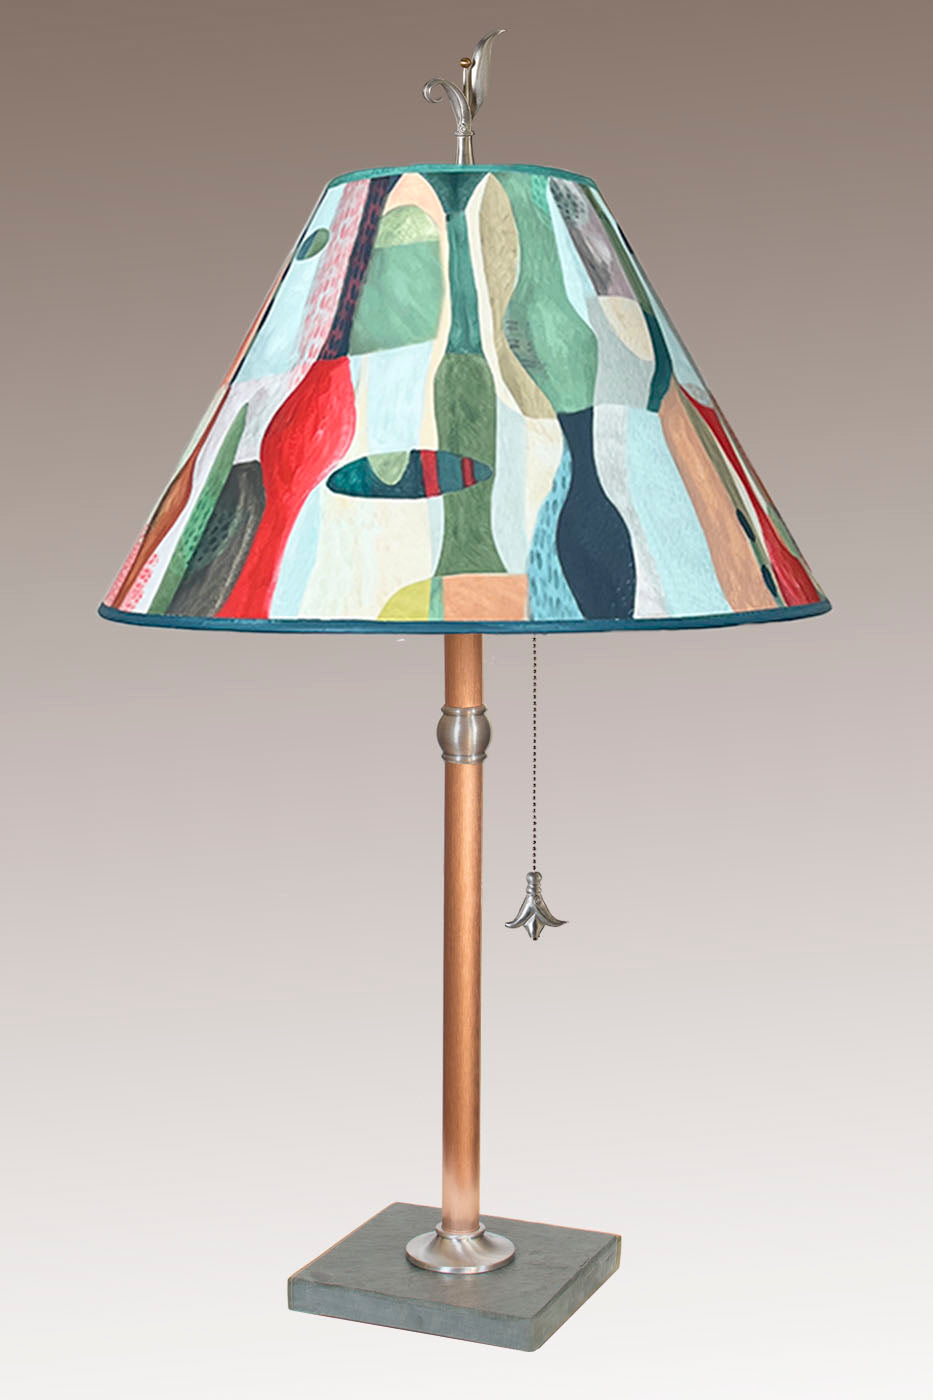 Janna Ugone & Co Table Lamp Copper Table Lamp with Medium Conical Shade in Riviera in Poppy